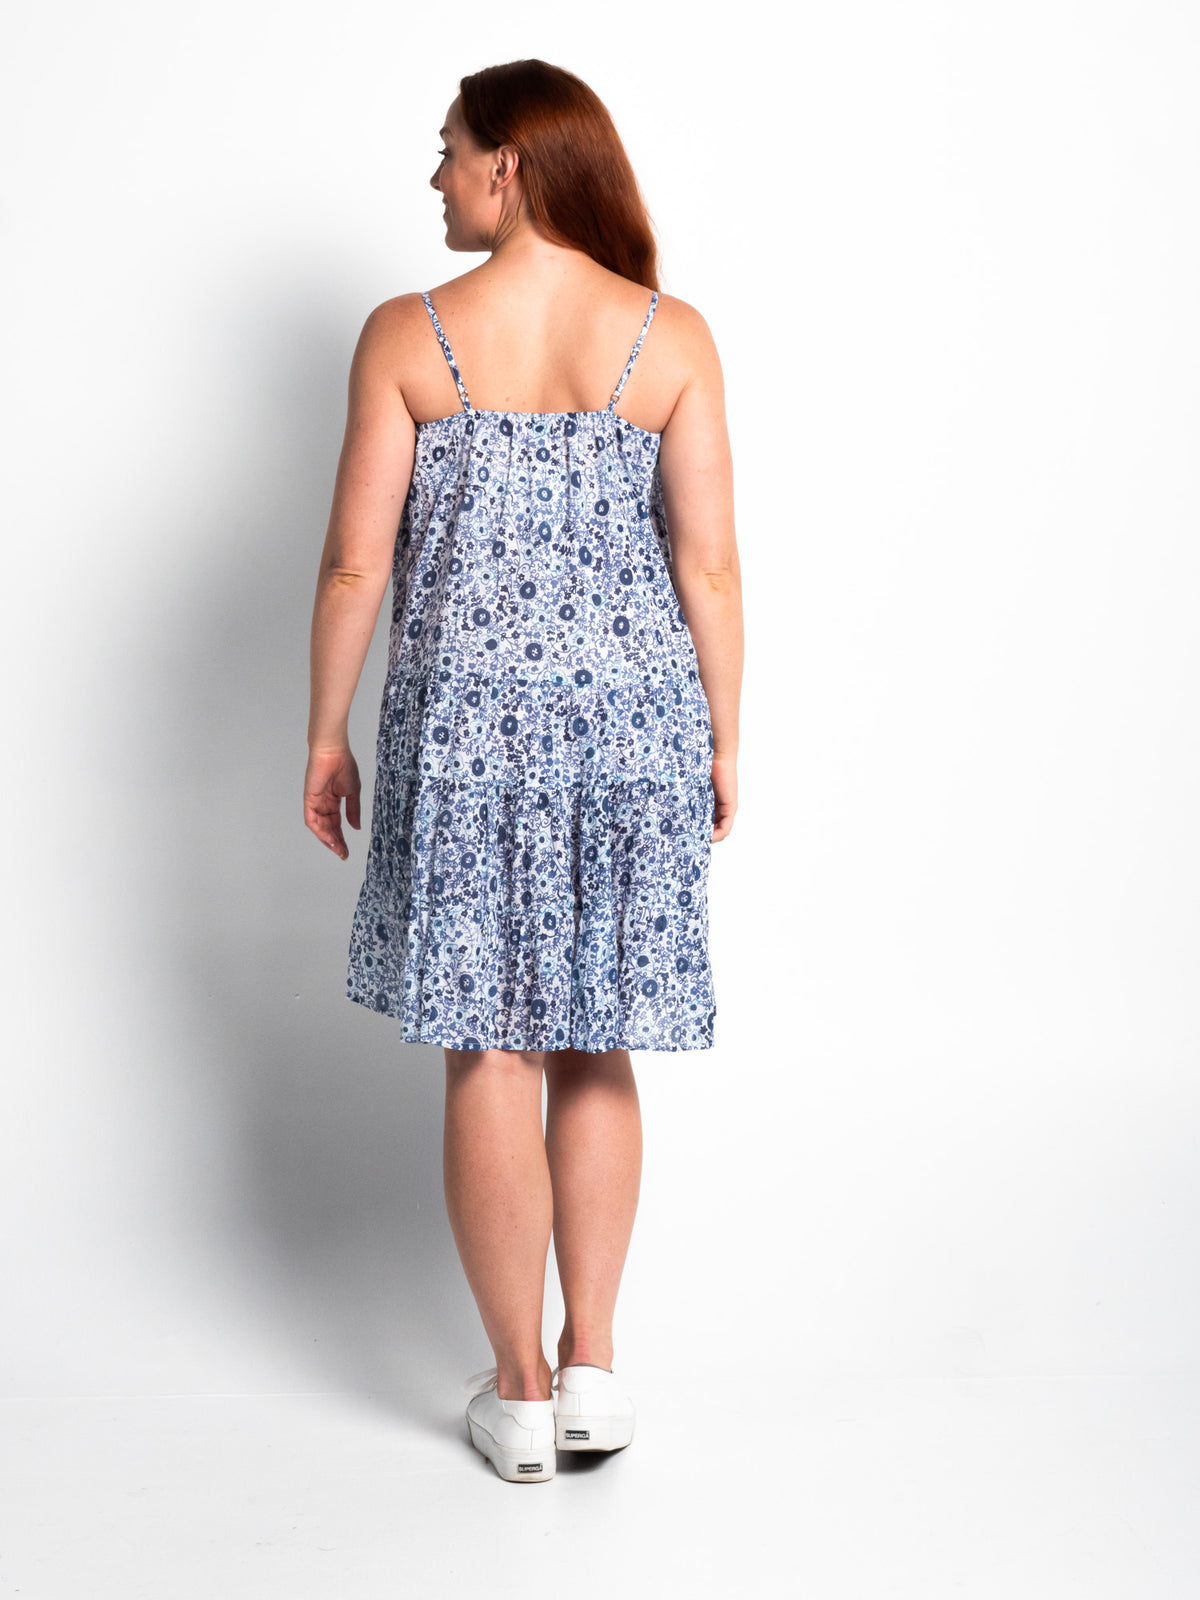 Chilli Strappy Dress in Small Blue Floral